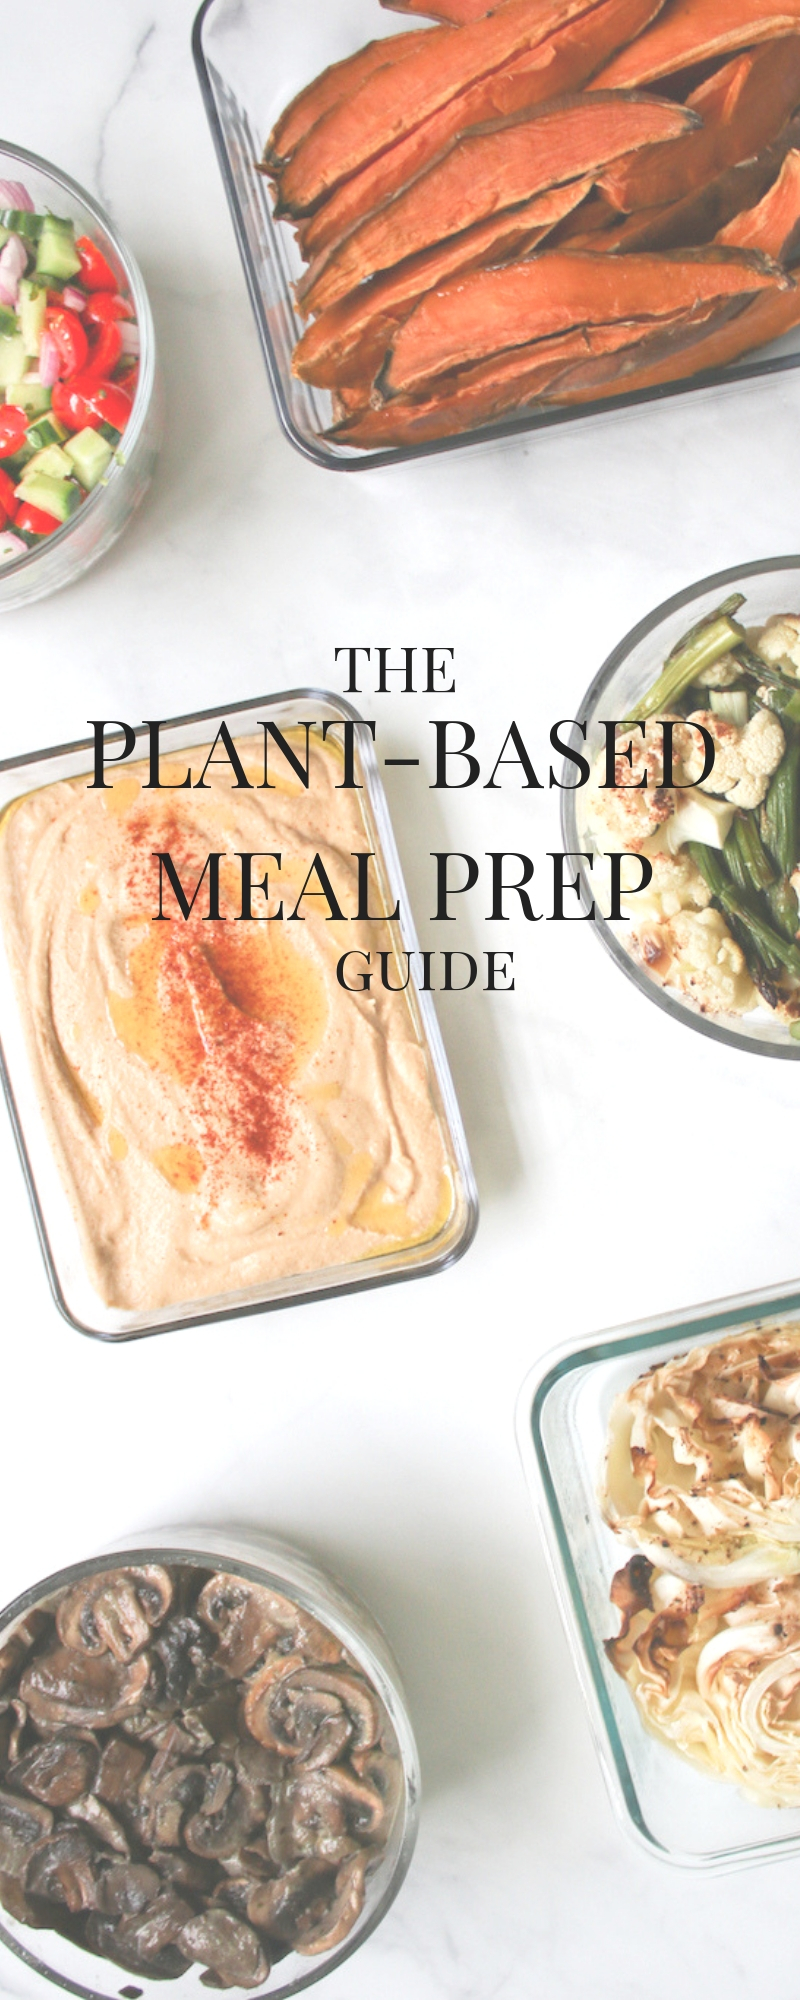 The Plant-based Meal Prep Guide